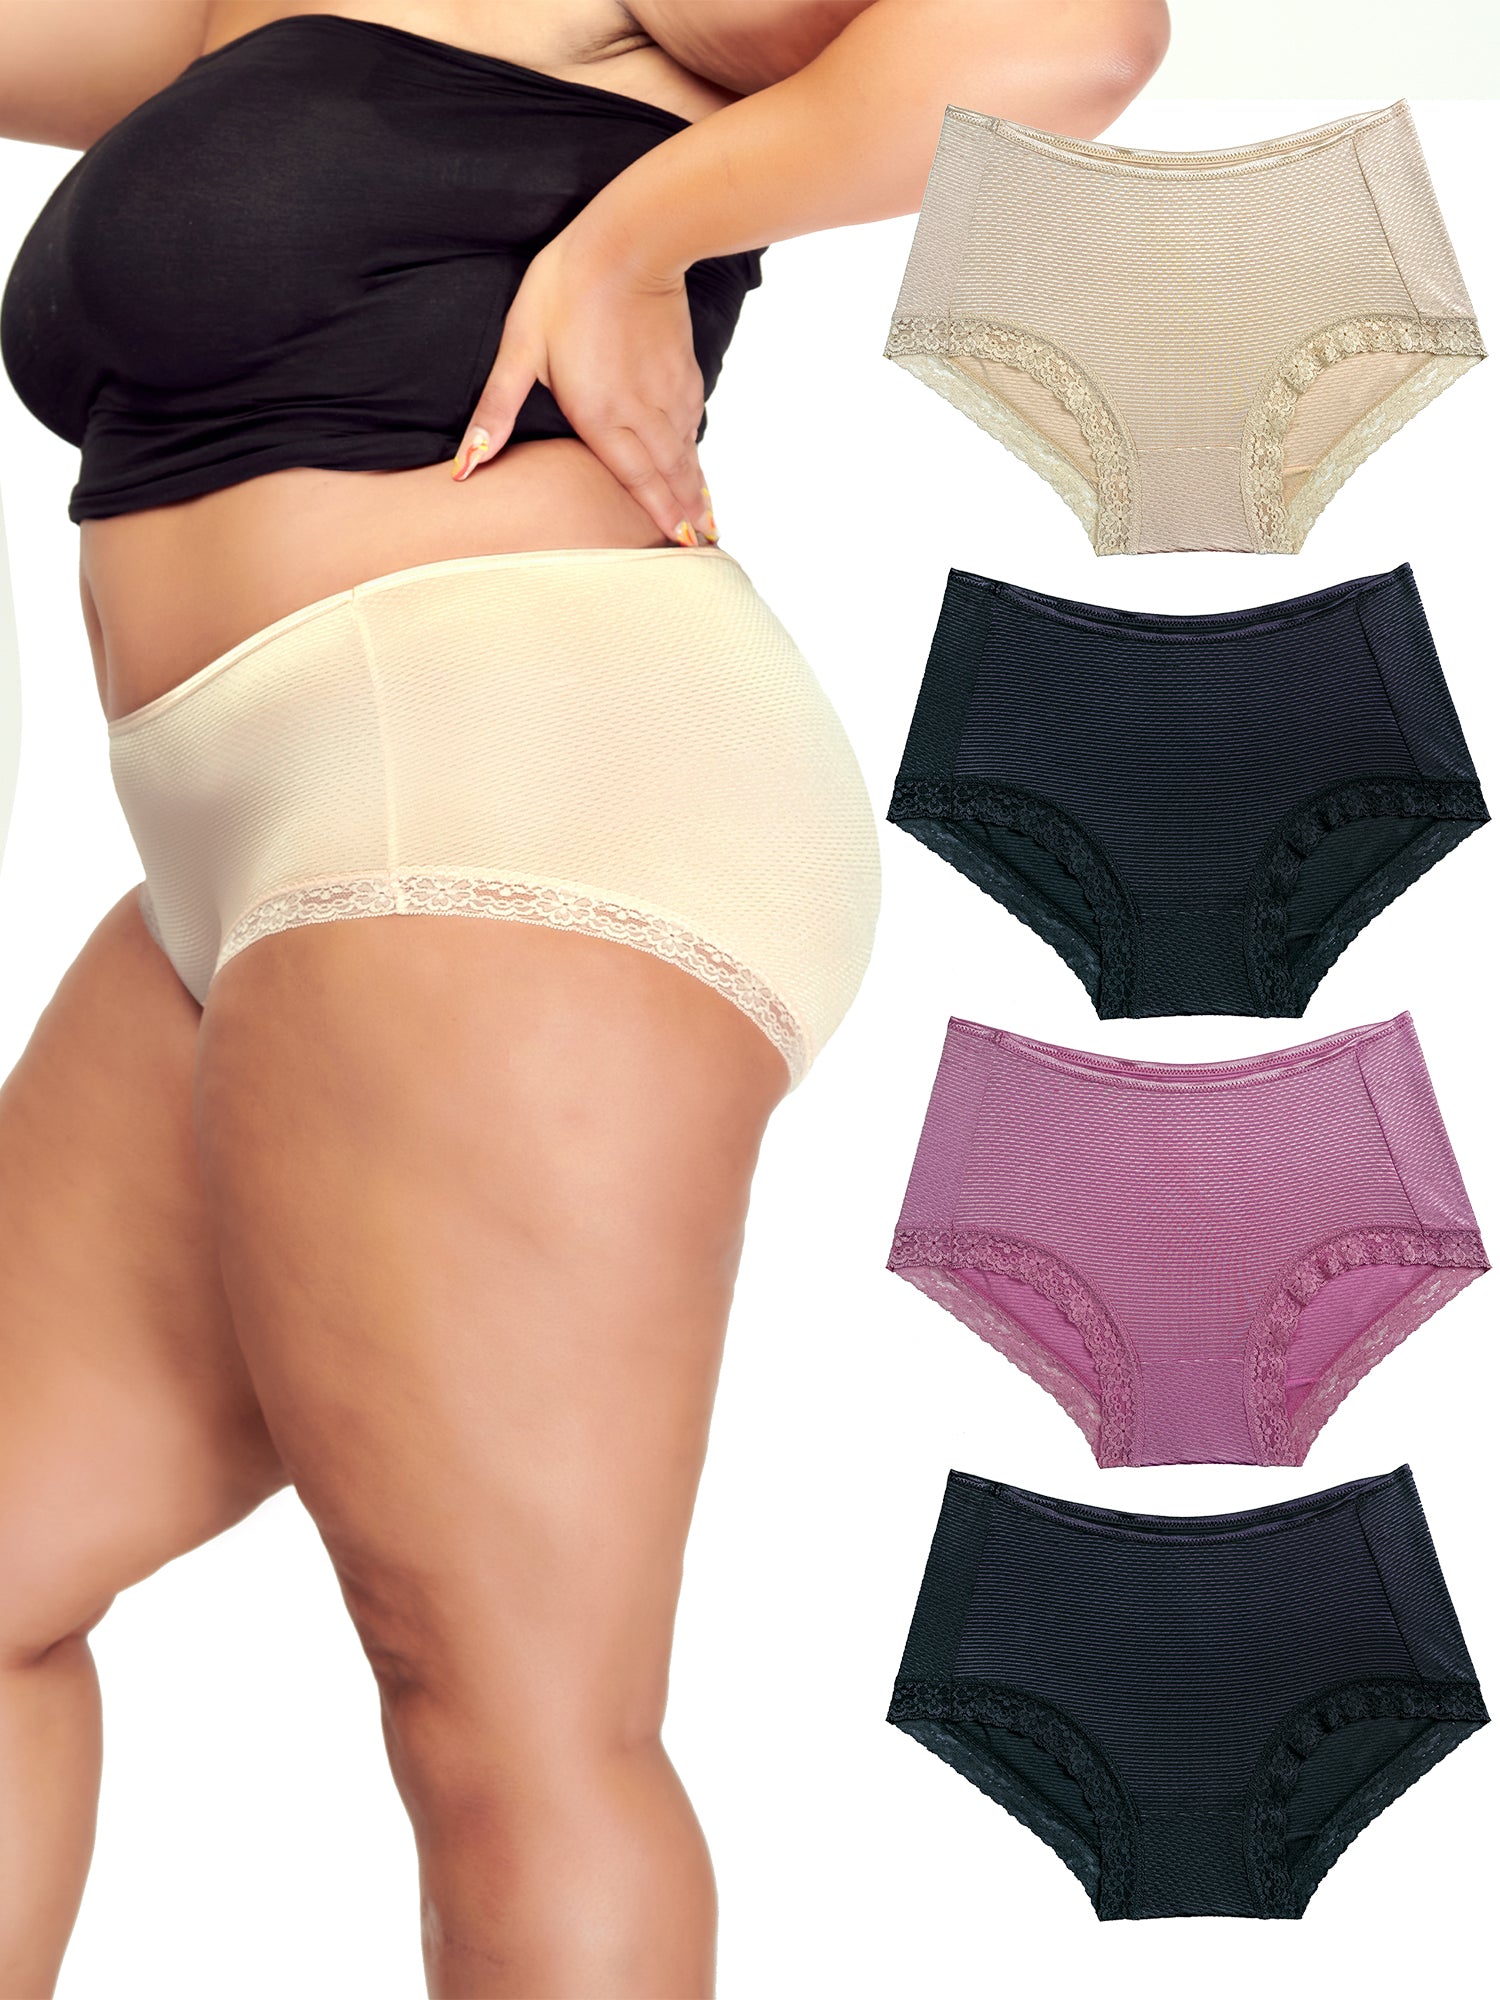 Women's Panties Microfiber Silicone Edge Hipsters XS-3X Plus Size